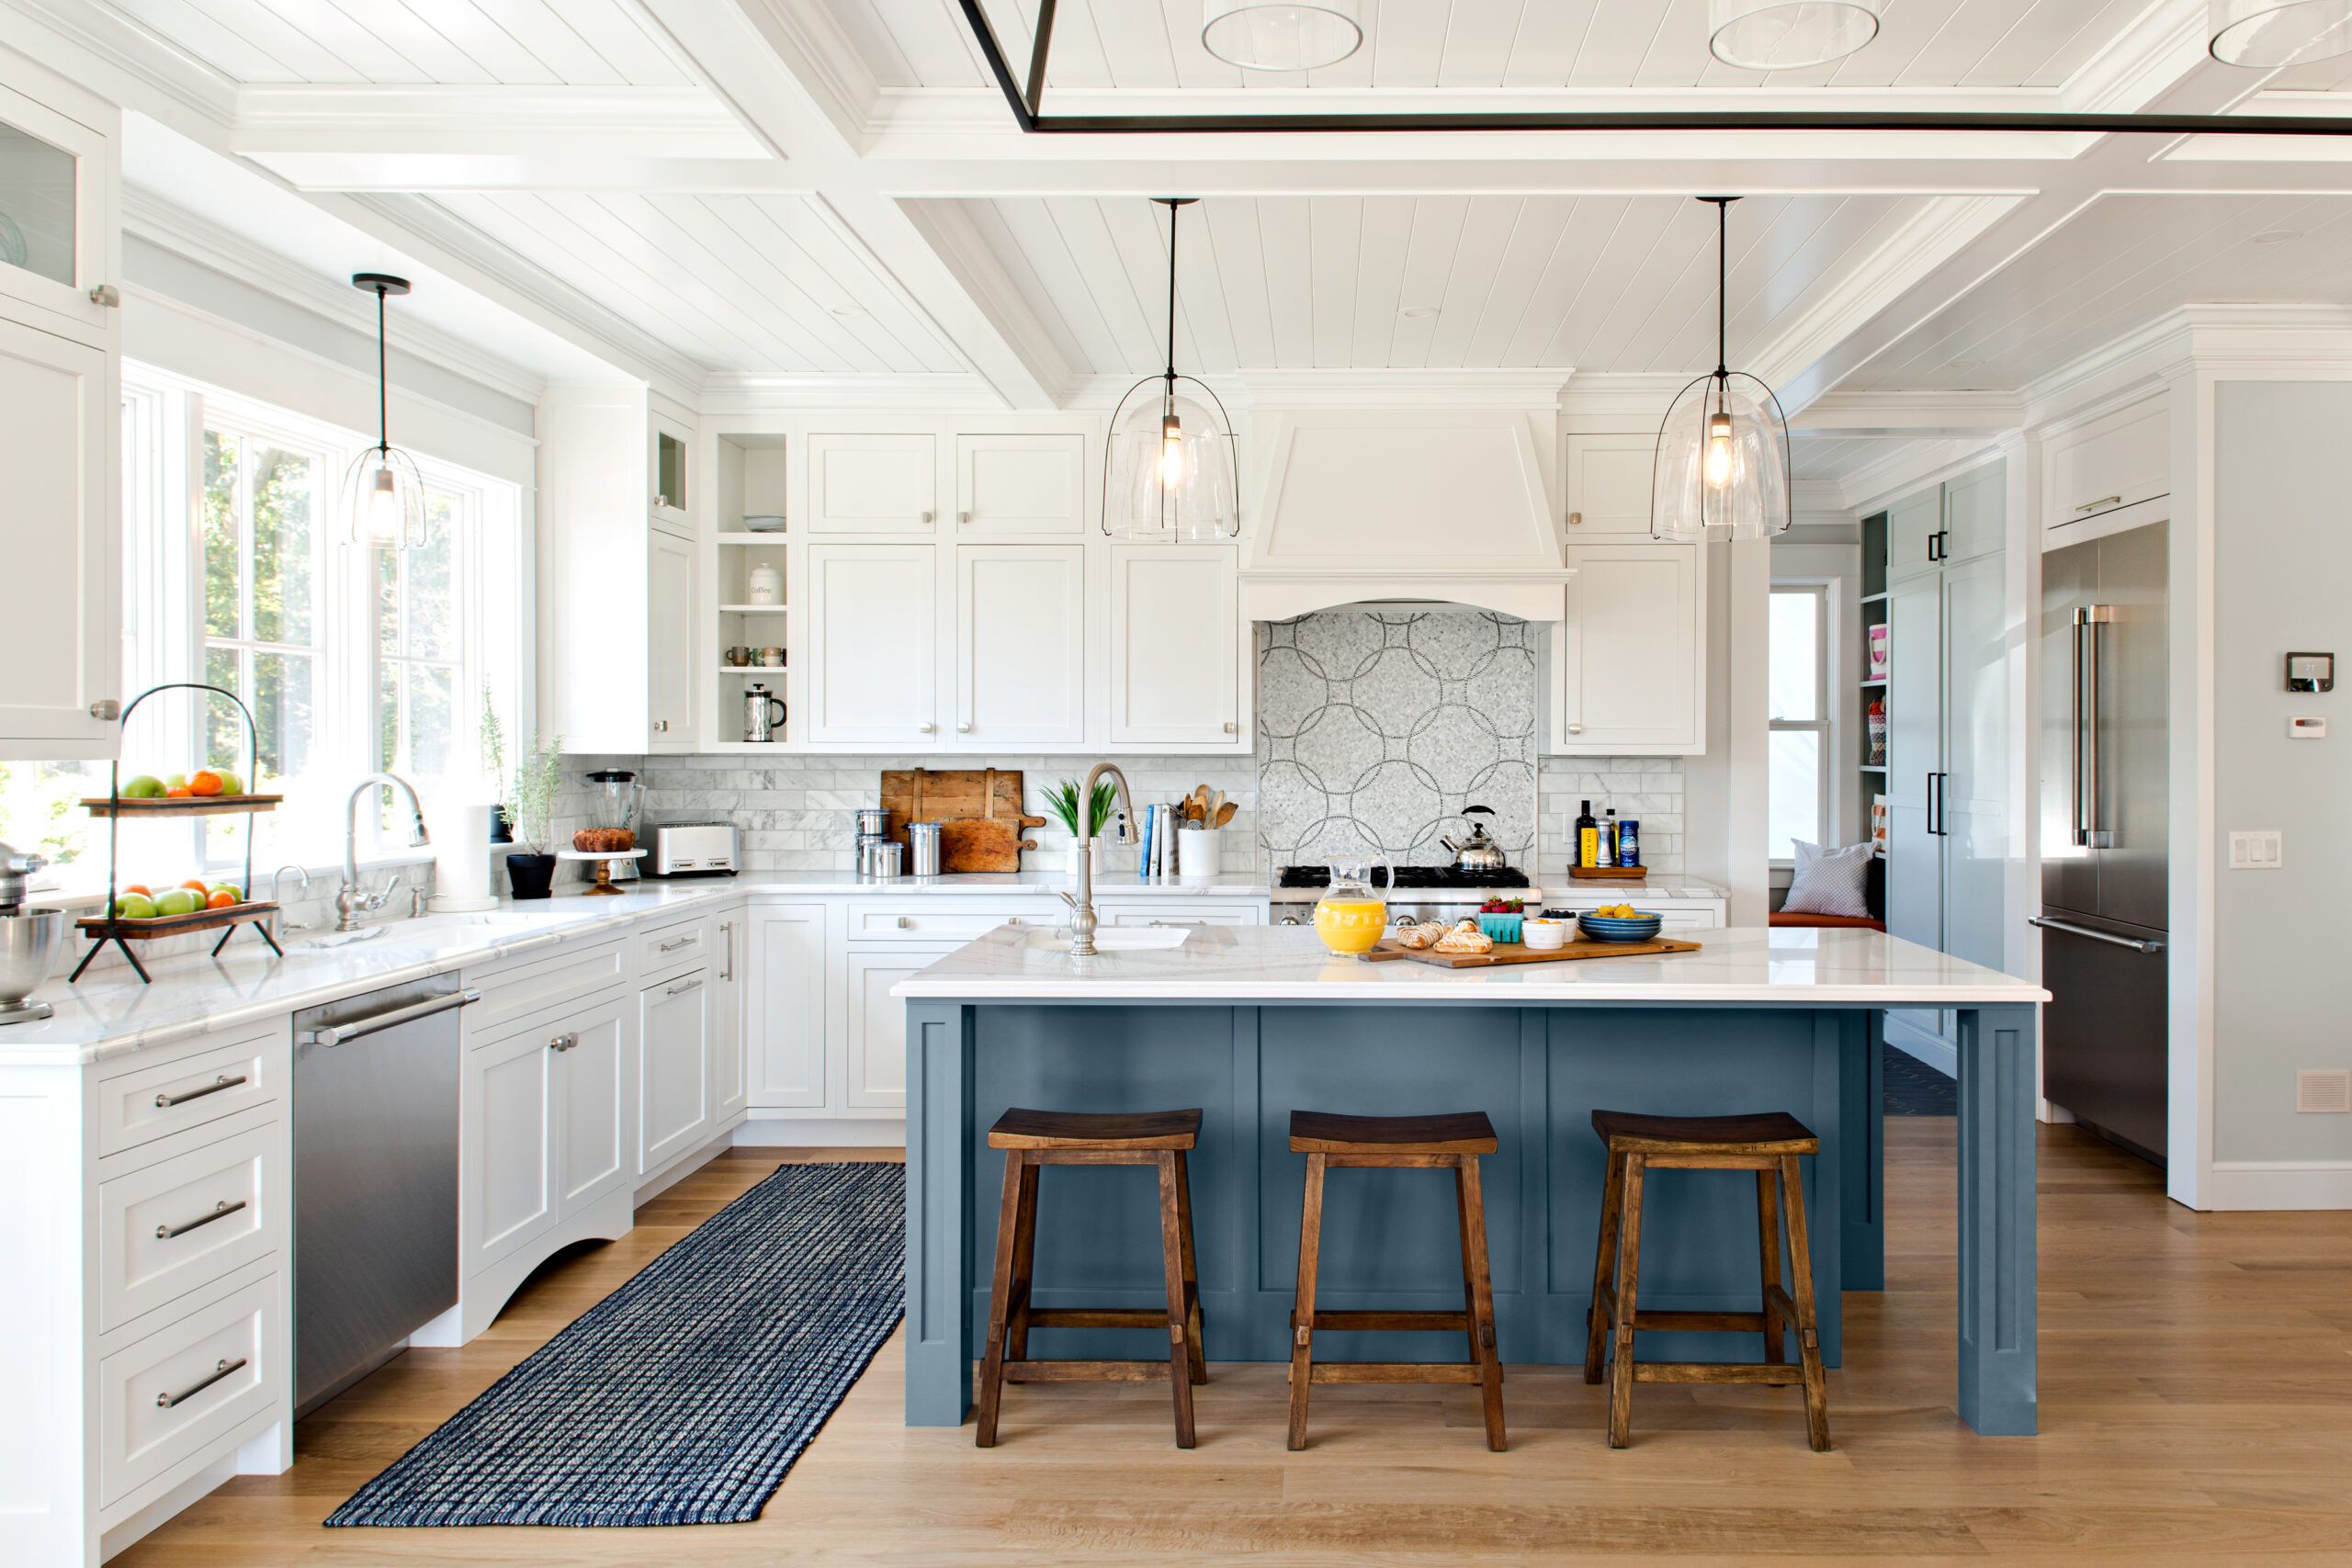 Off Center Kitchen Island: Maximize Efficiency and Style